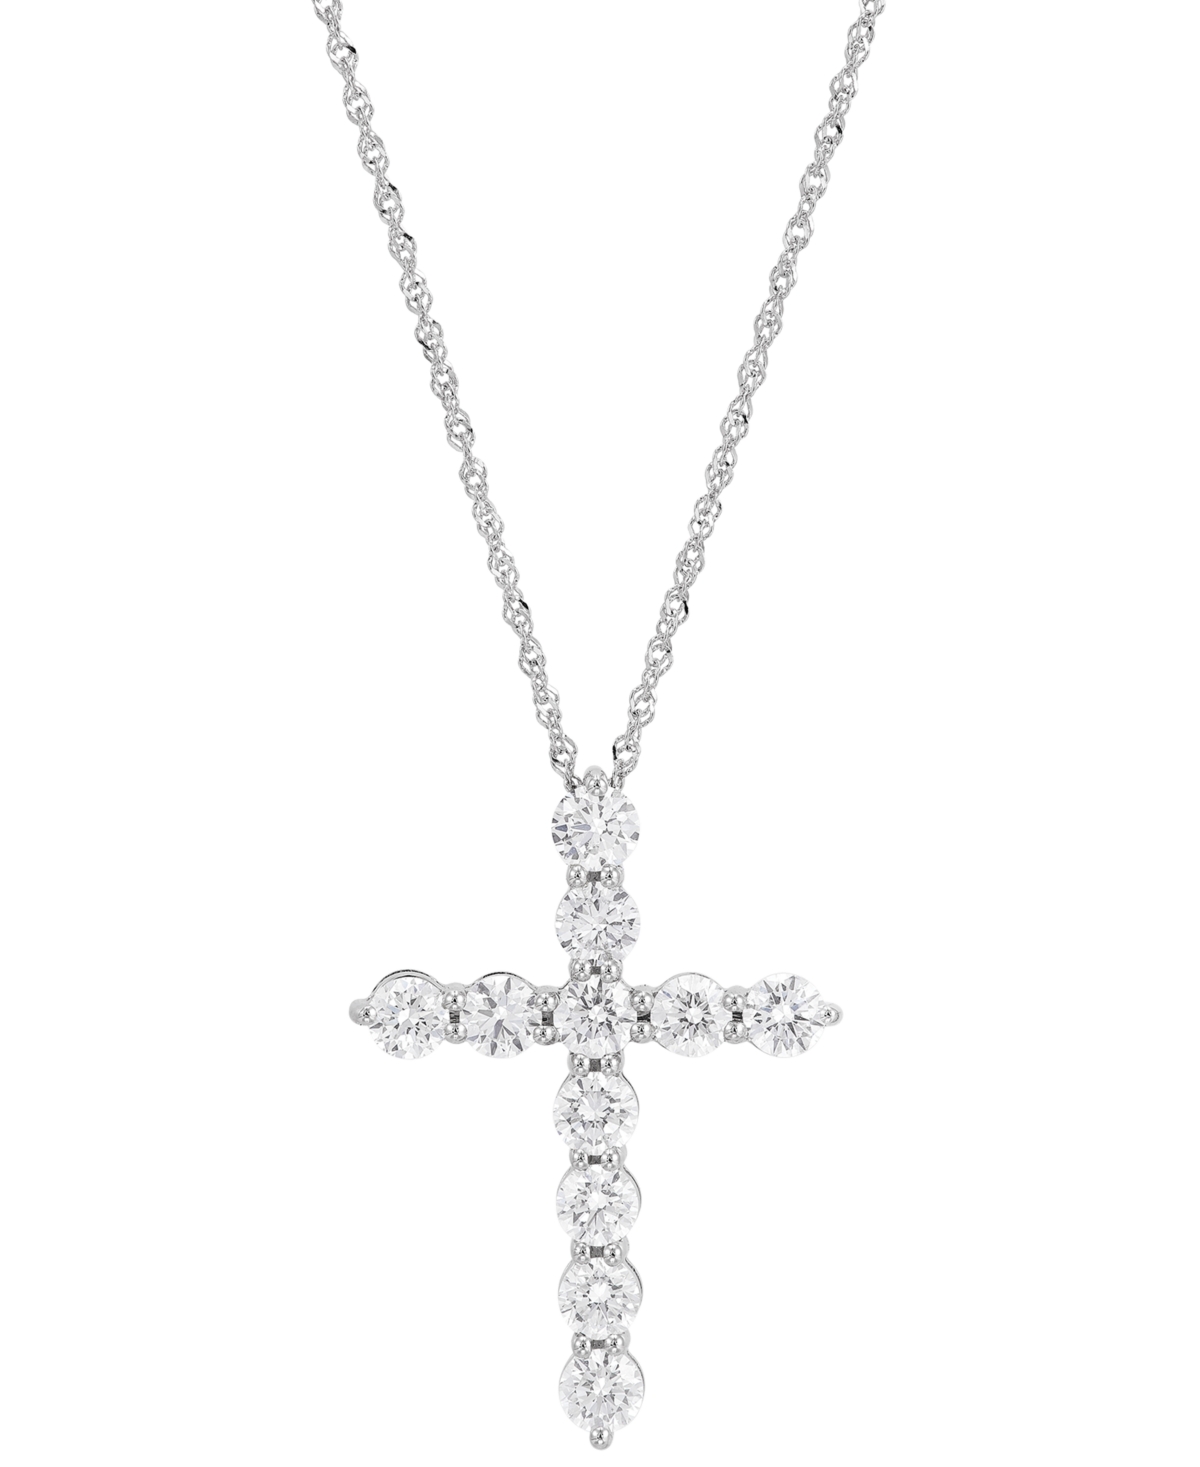 Lab Grown Diamond Cross Pendant Necklace (2 ct. t.w.) in 14k White Gold, 16" + 2" extender - White Gold